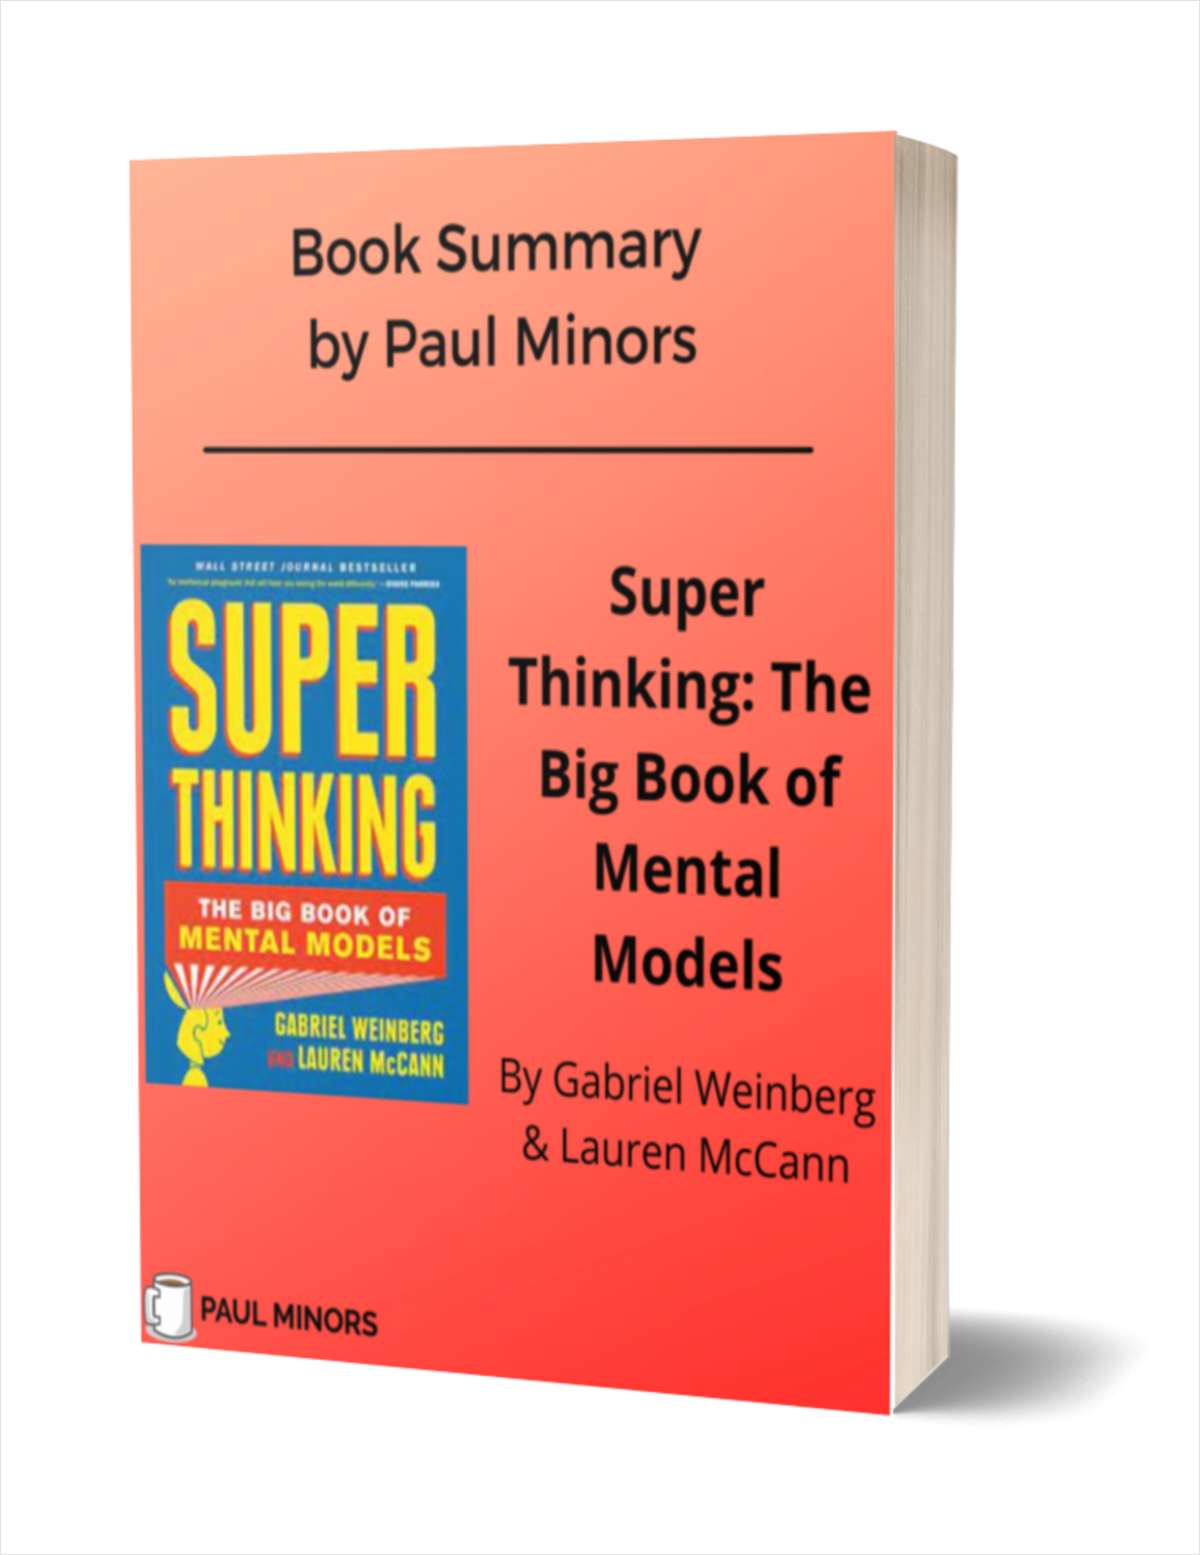 Super Thinking: The Big Book of Mental Models Book Summary